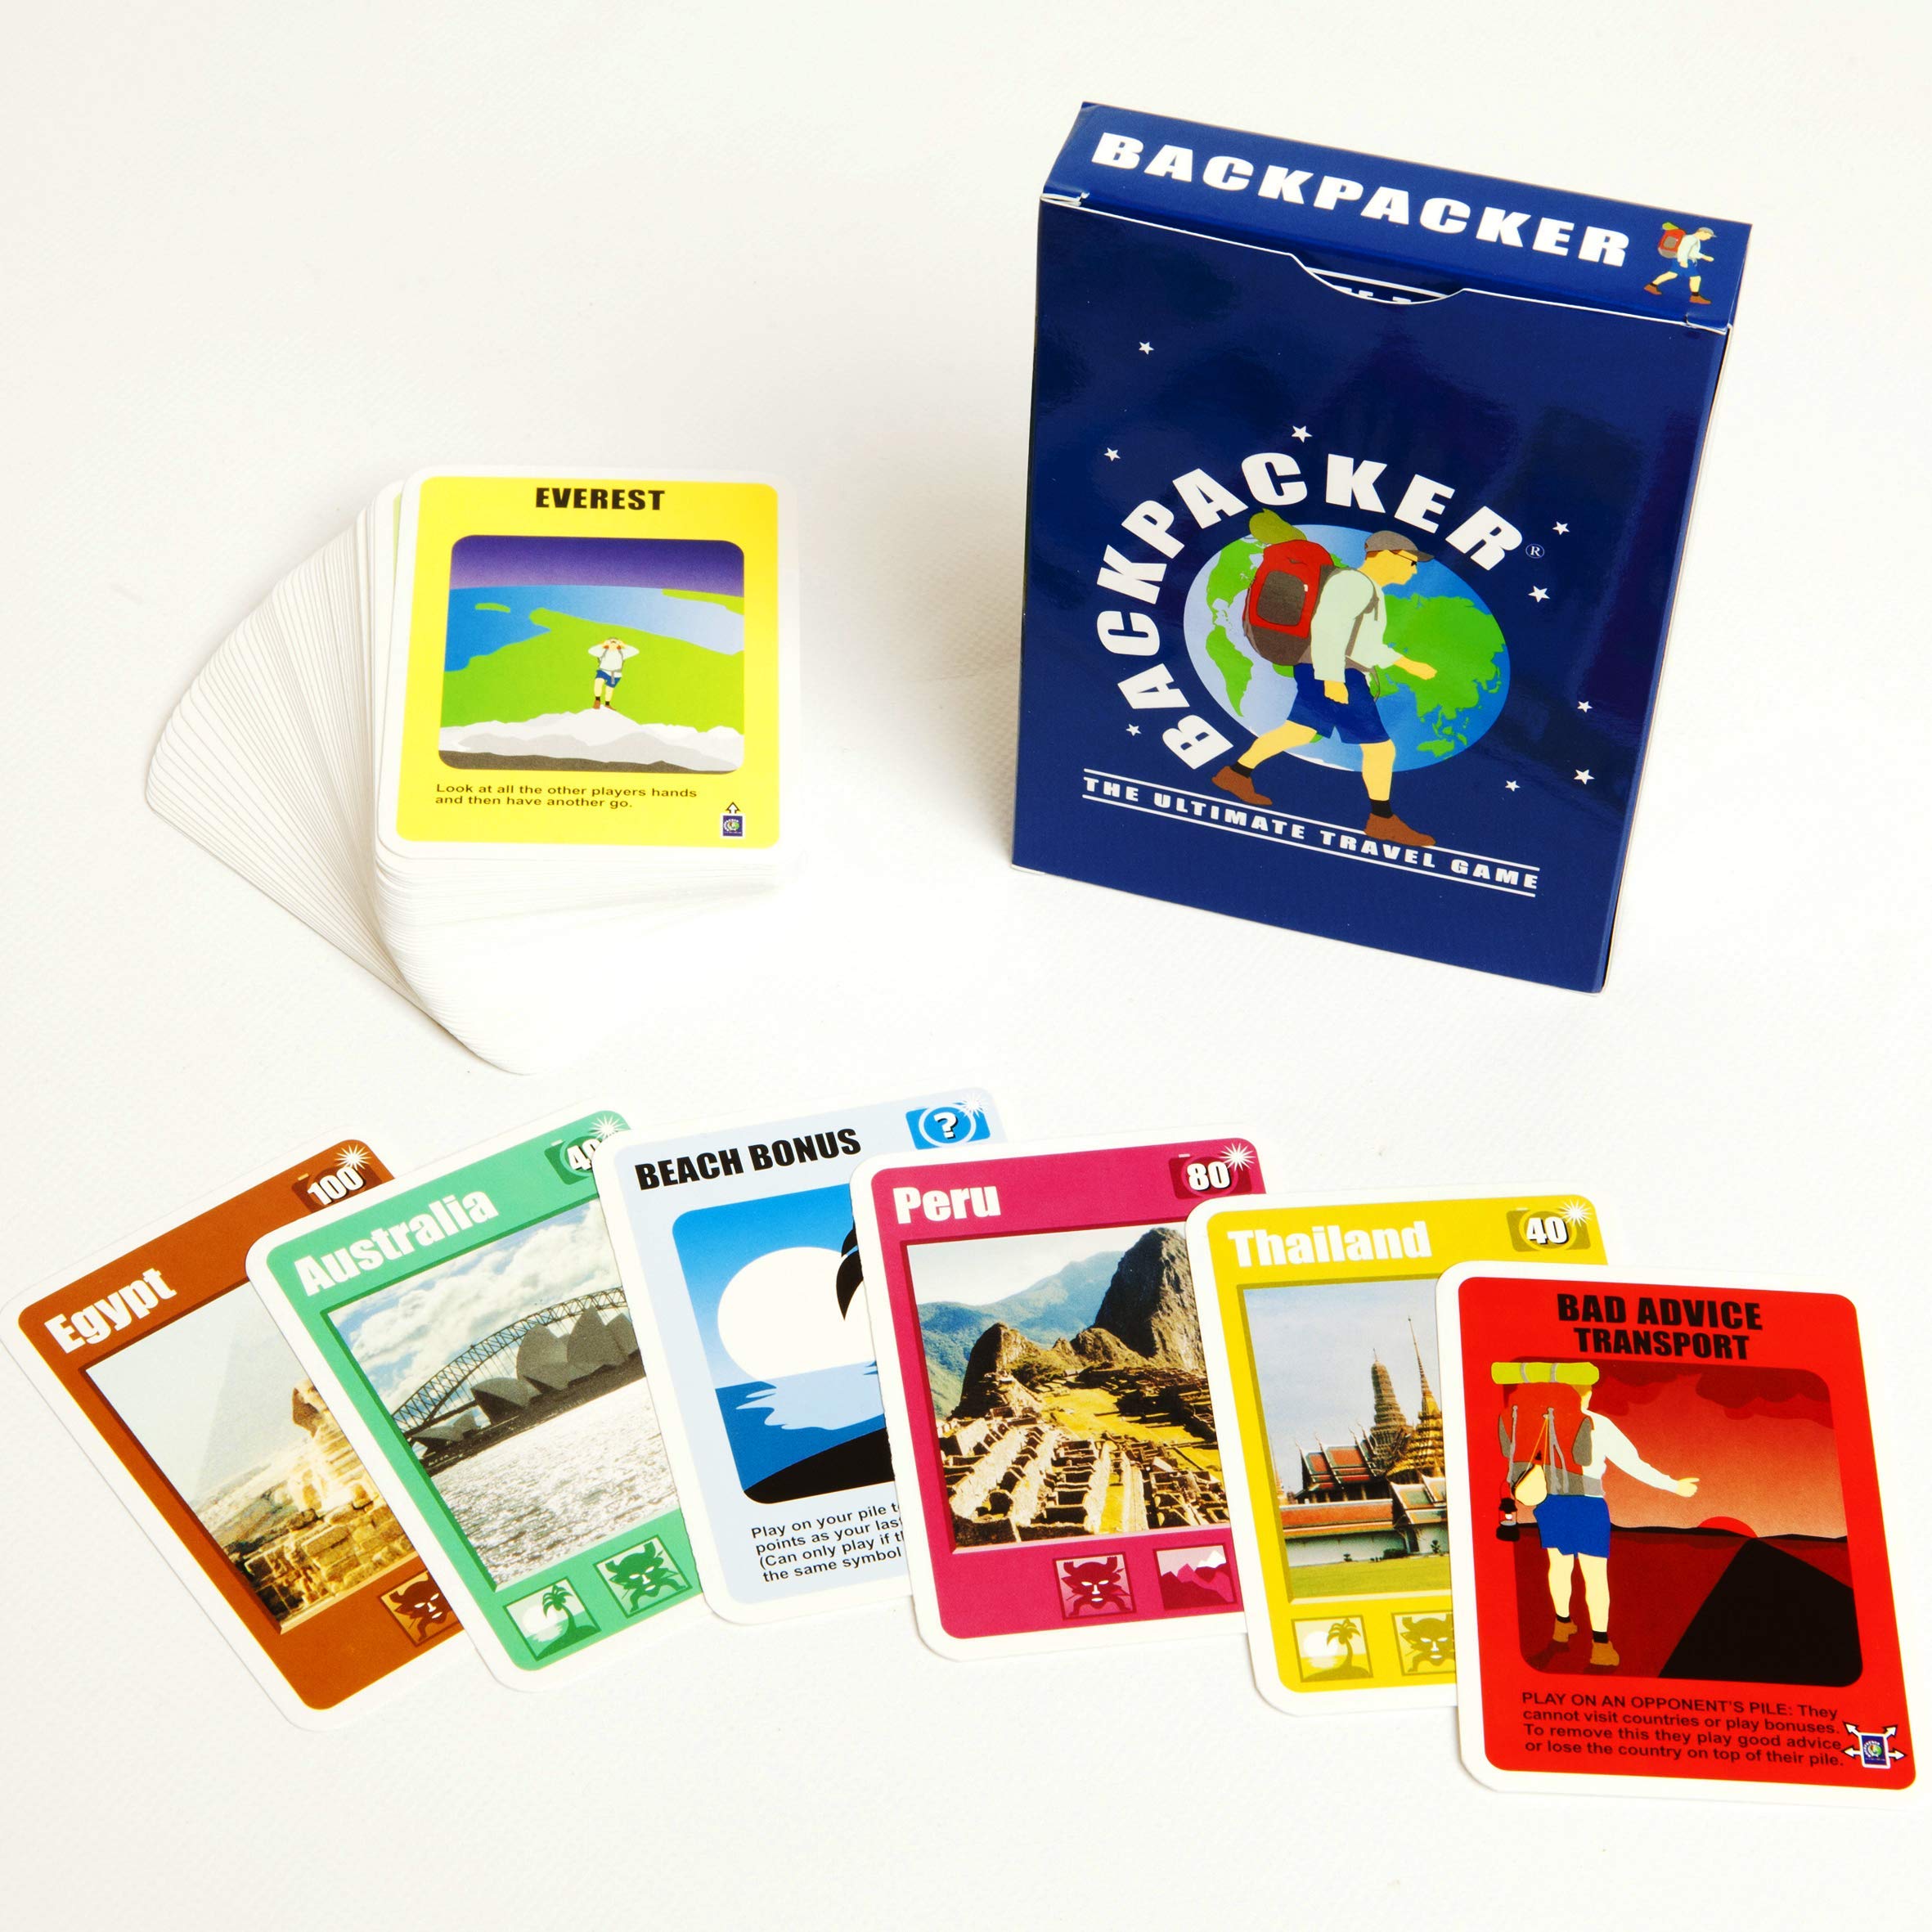 Backpacker - The Ultimate Travel Game - Fun Pocket Sized Card Game About Travelling Around The World